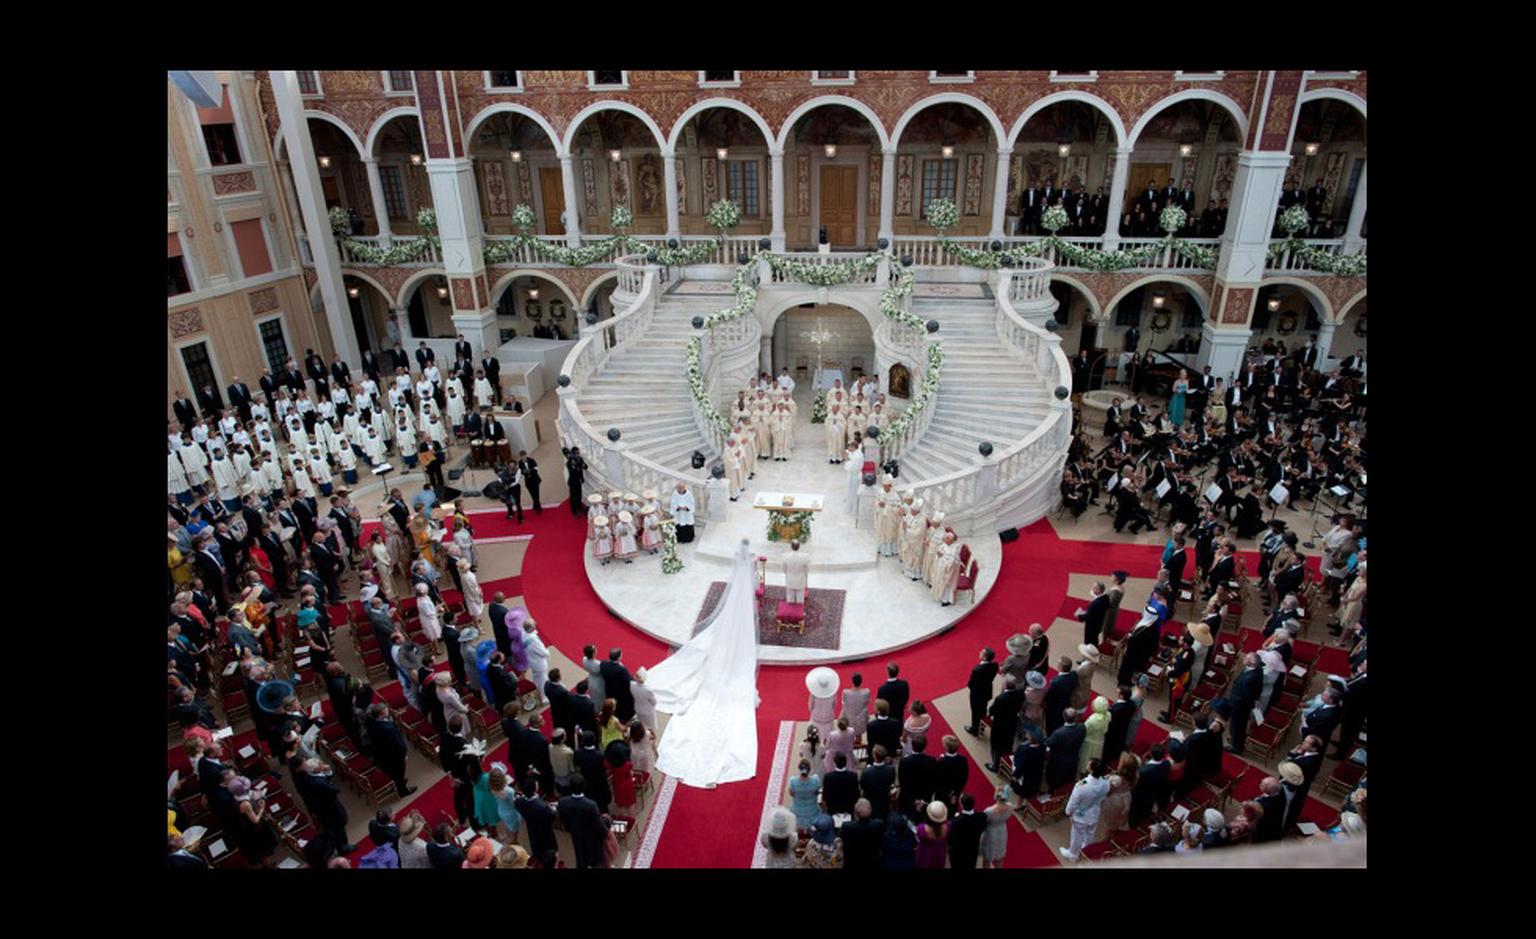 Bird's eye view of the religious marriage ceremony of Prince Albert II to Princess Charlene. Photo: Prince's Palace of Monaco